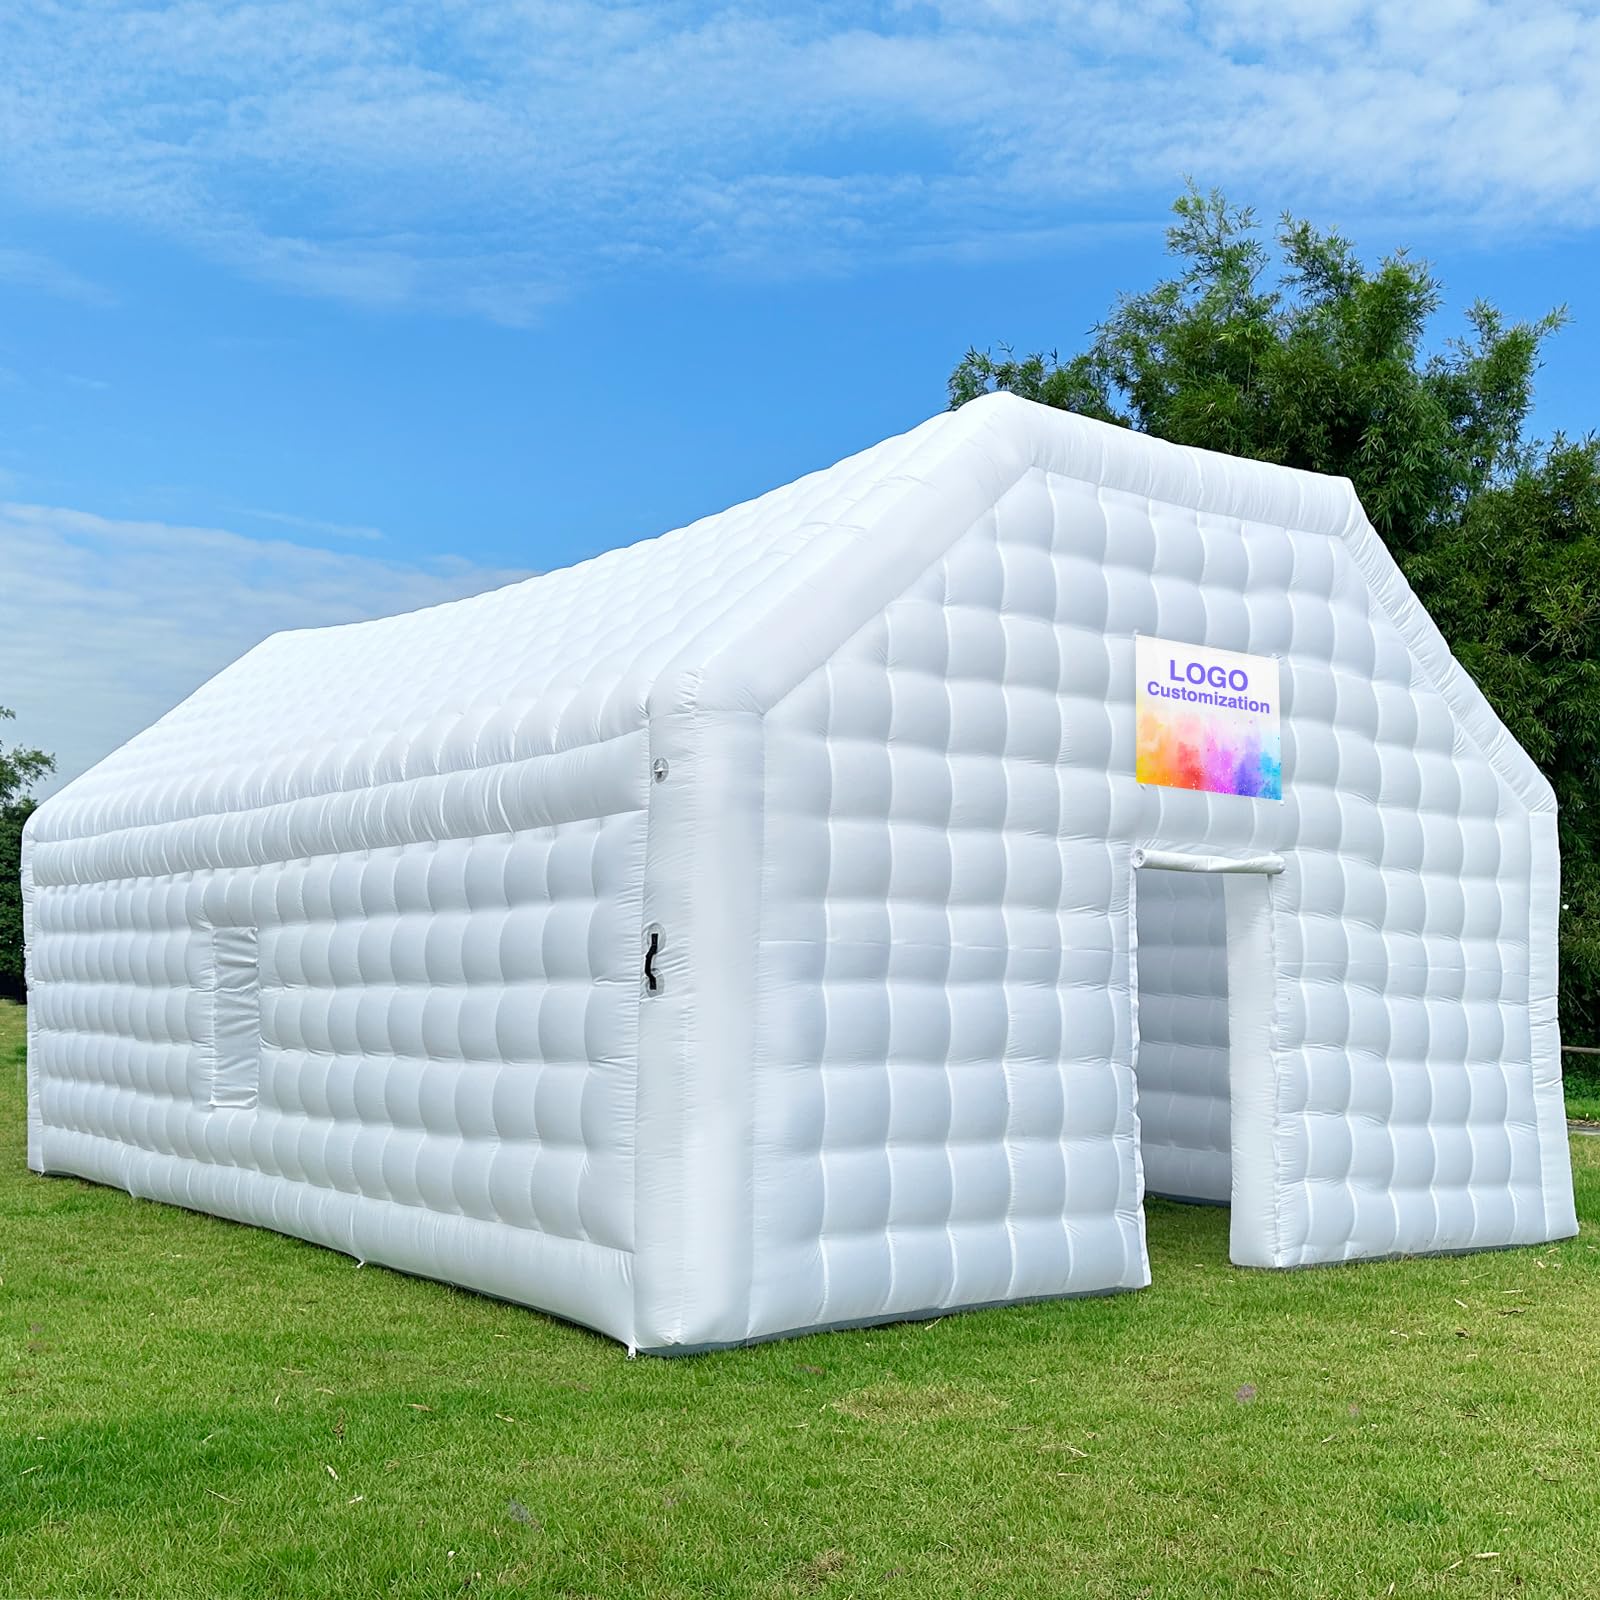 Outdoor 30 x 20 x 13ft Large White Inflatable Night Club Disco Cube Gazebo Event House Portable Inflatable Party Tent for Parties, Shows, Events, and Commercial Use